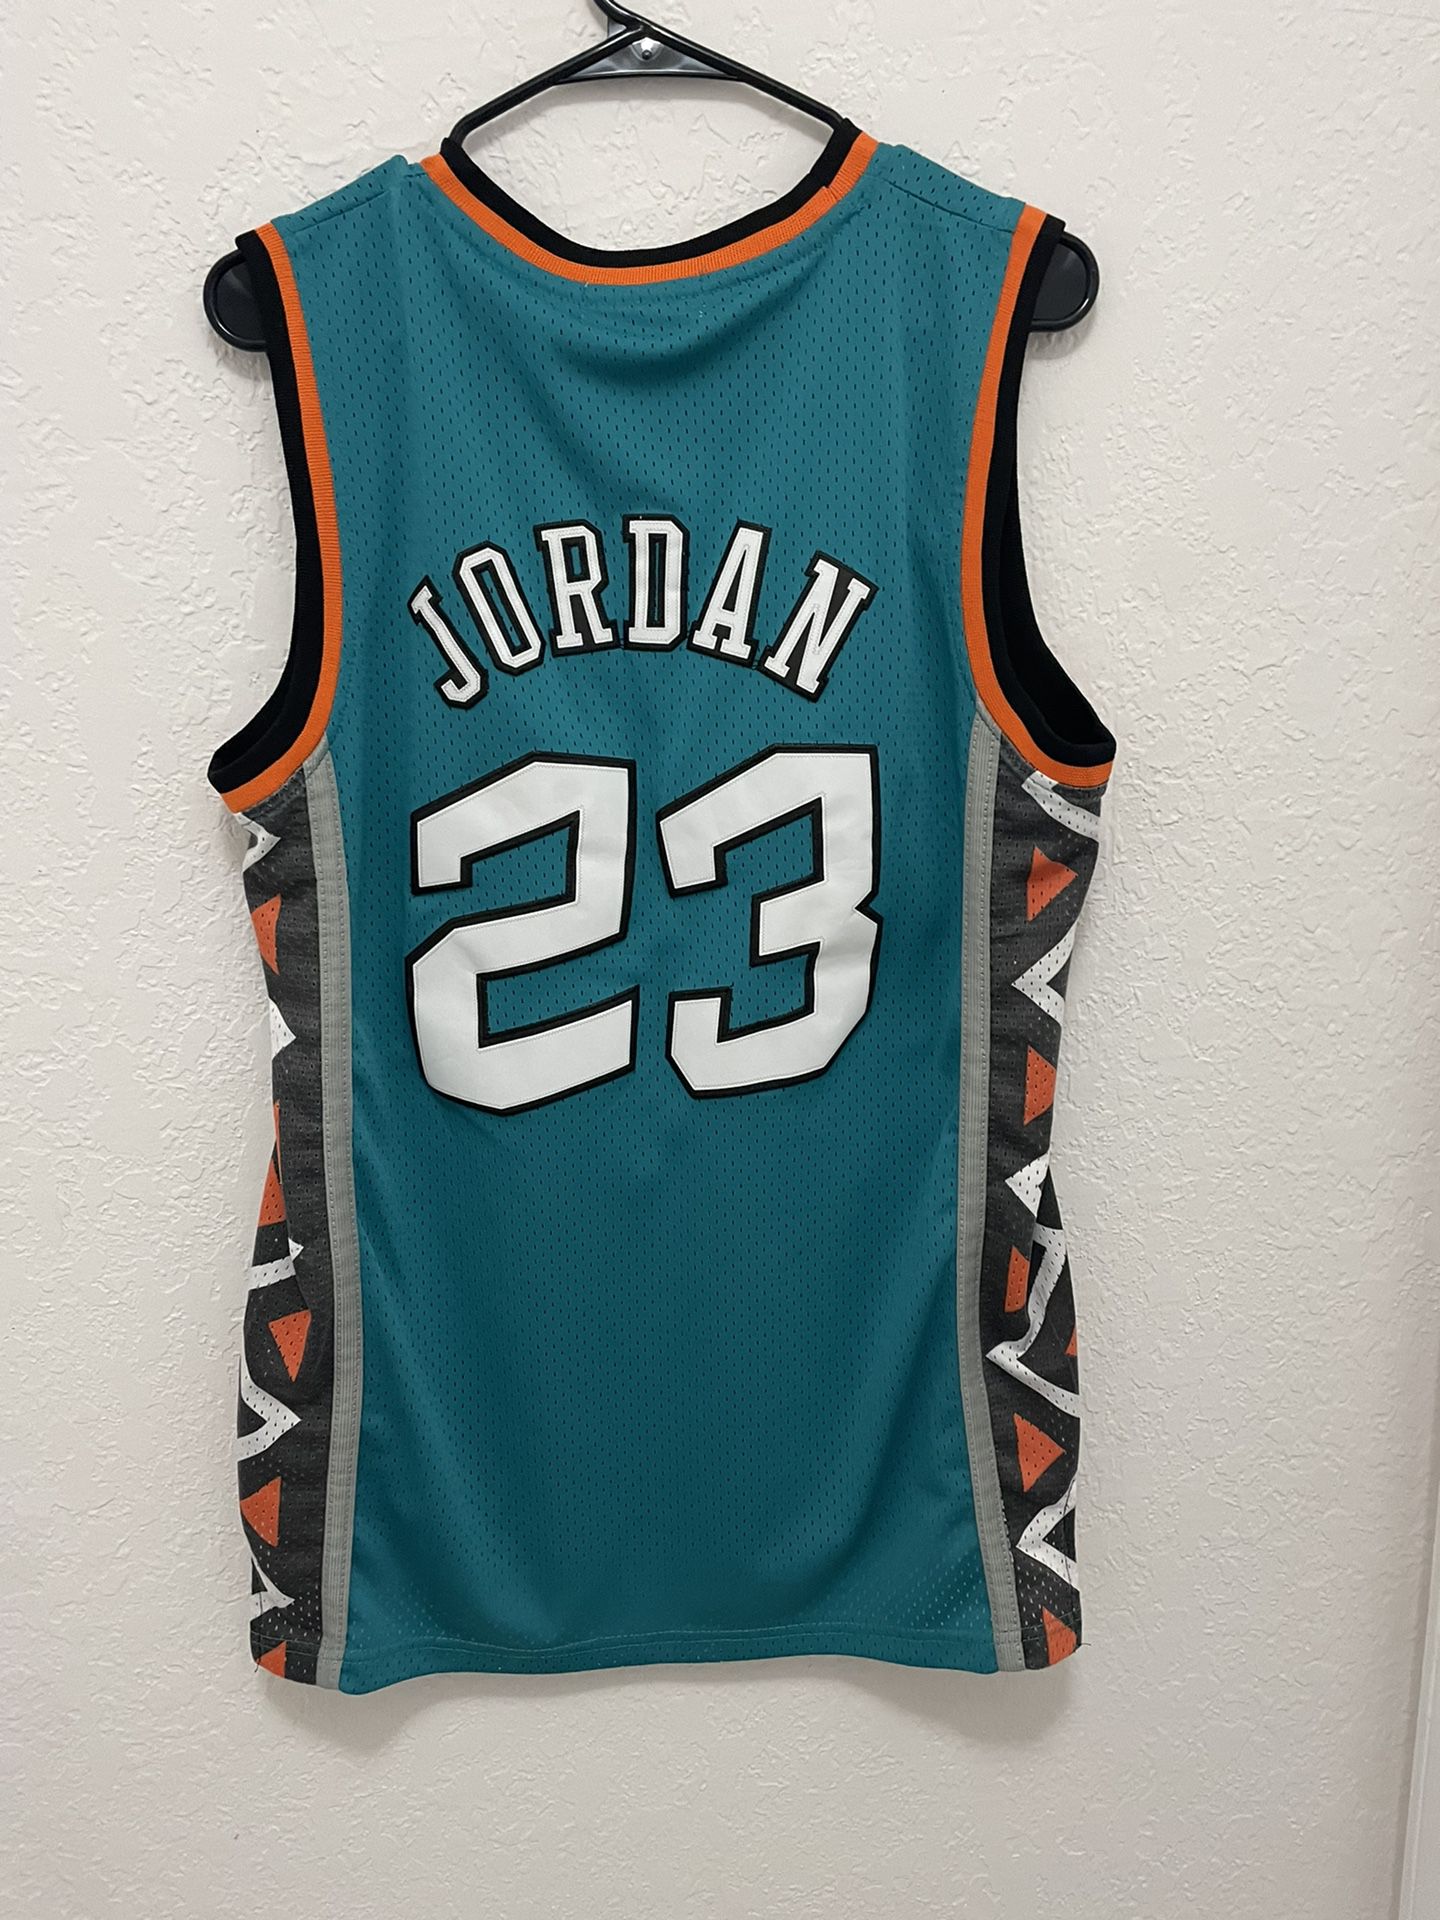 The Mitchell & Ness Michael Jordan Authentic Gold Jersey 